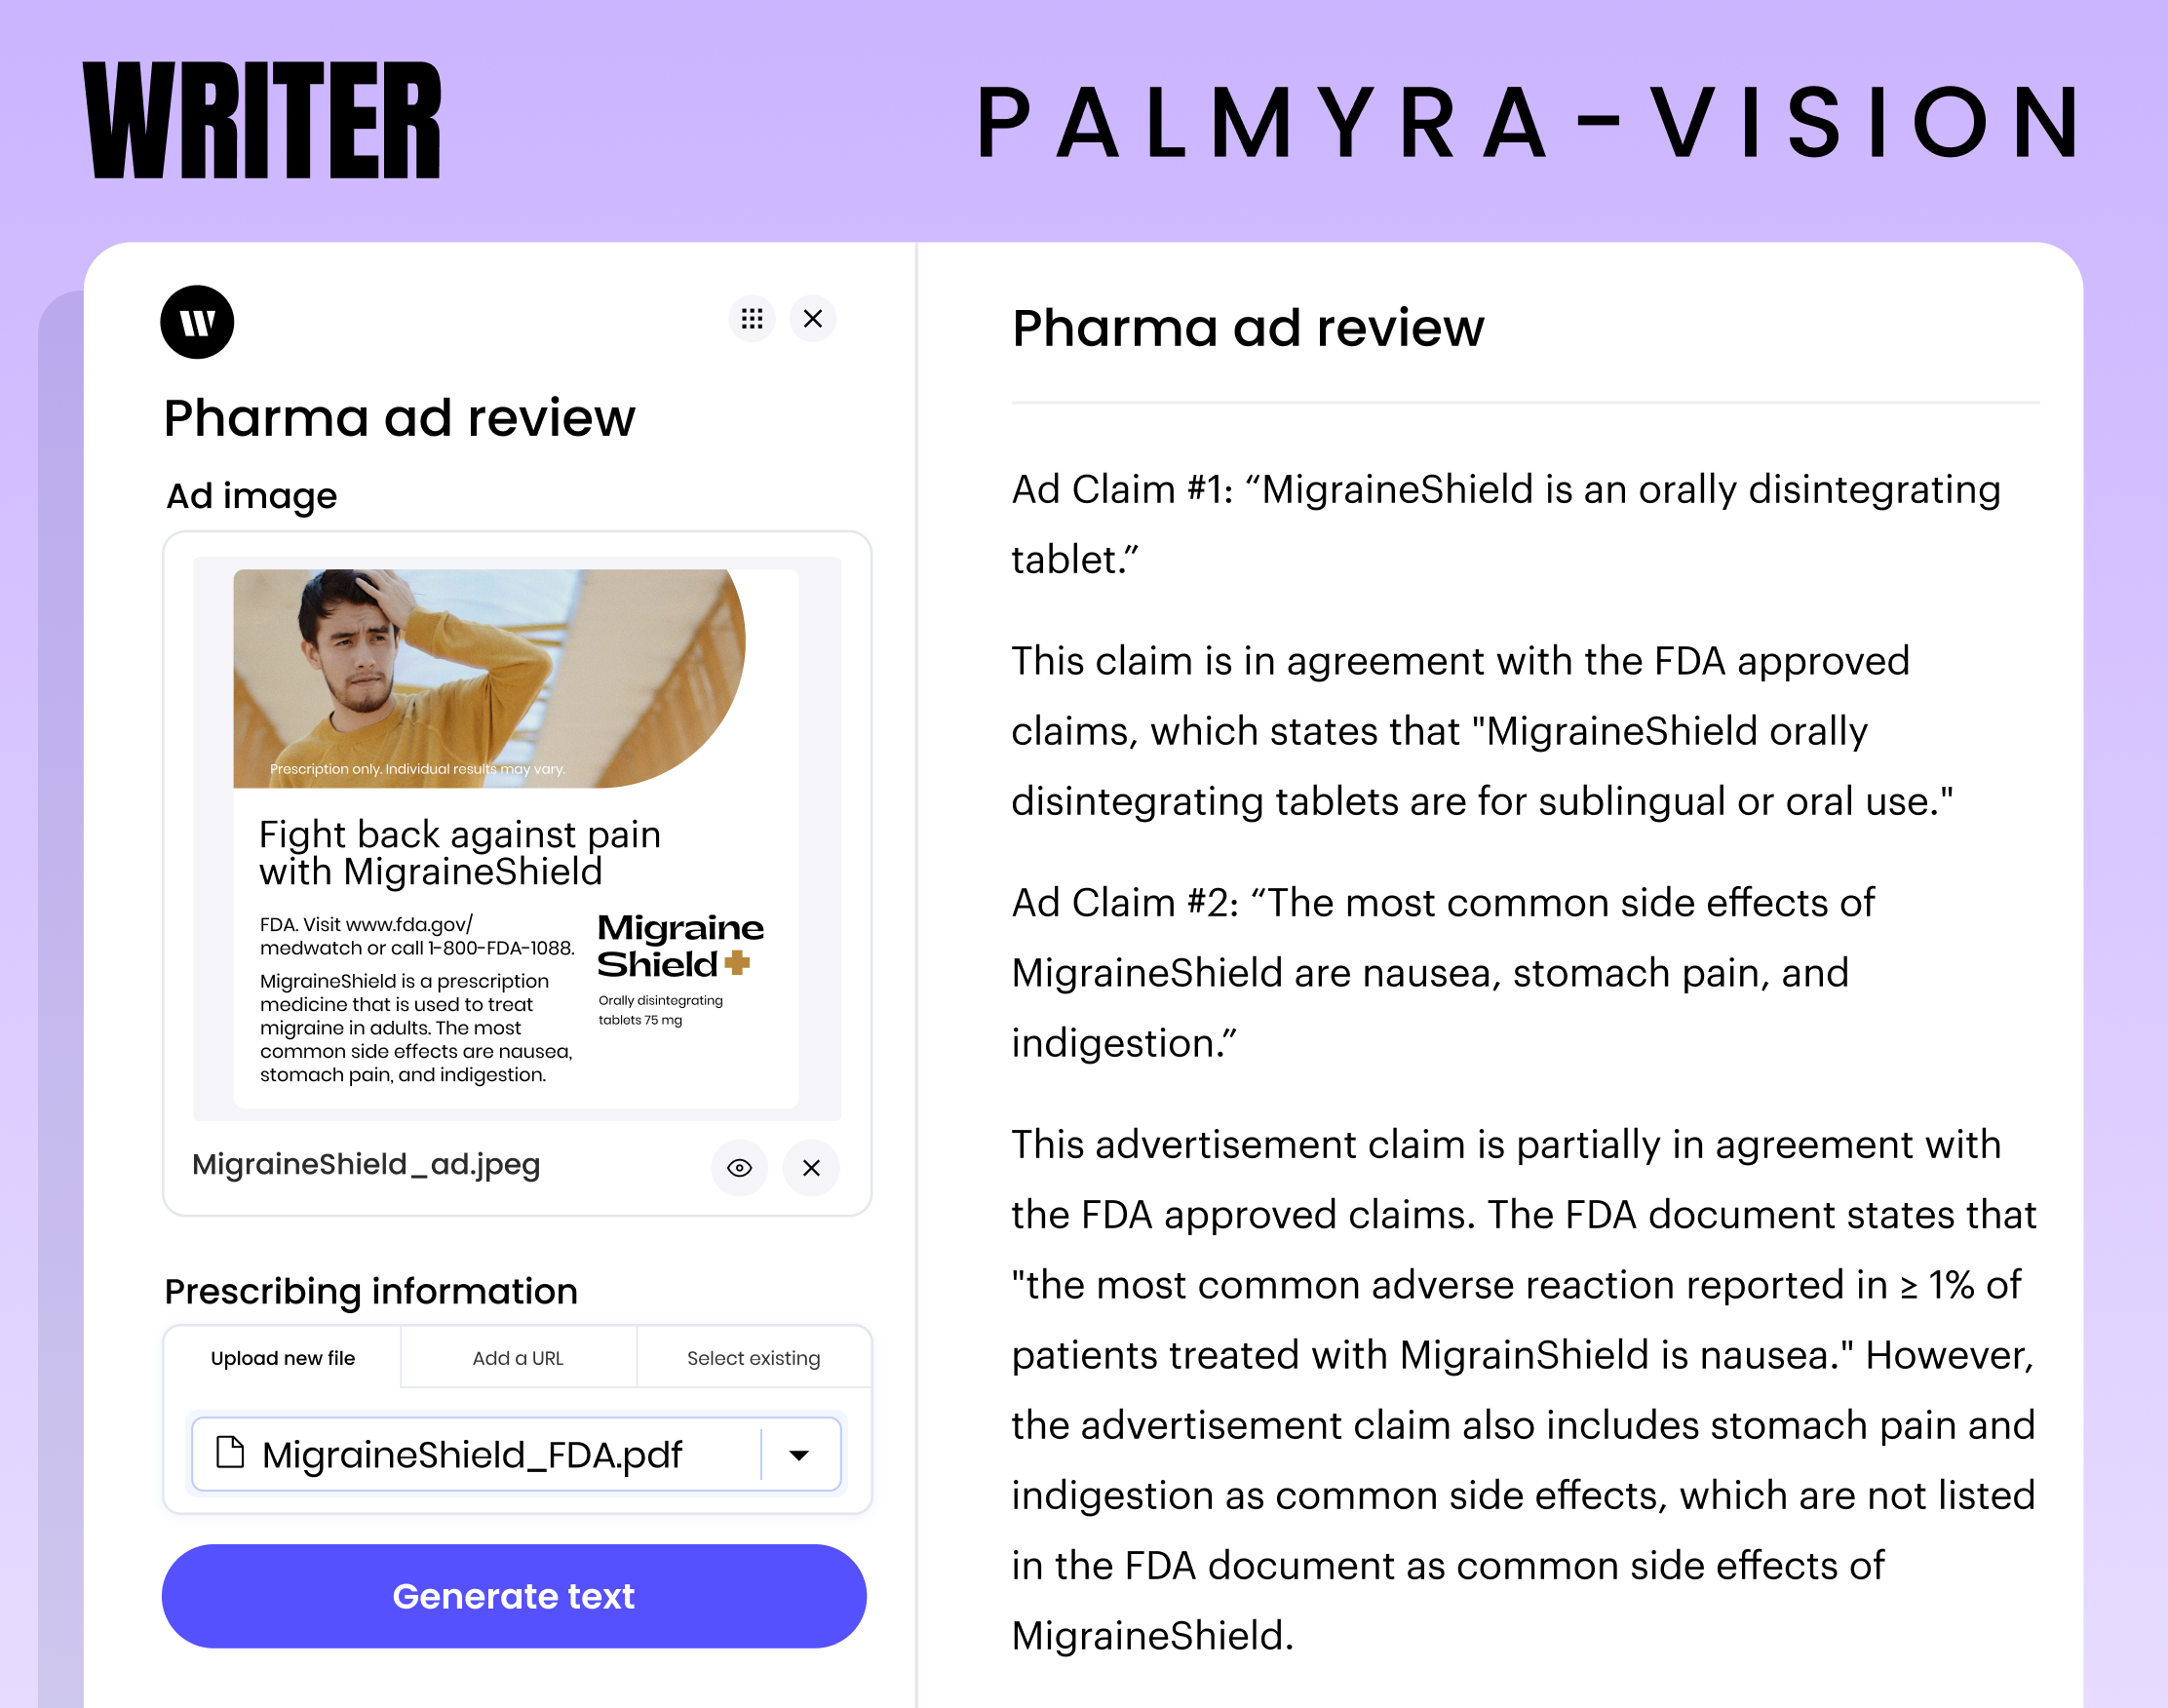 Writer Palmyra Vision example for pharma company checking ad against a document with FDA requirements.